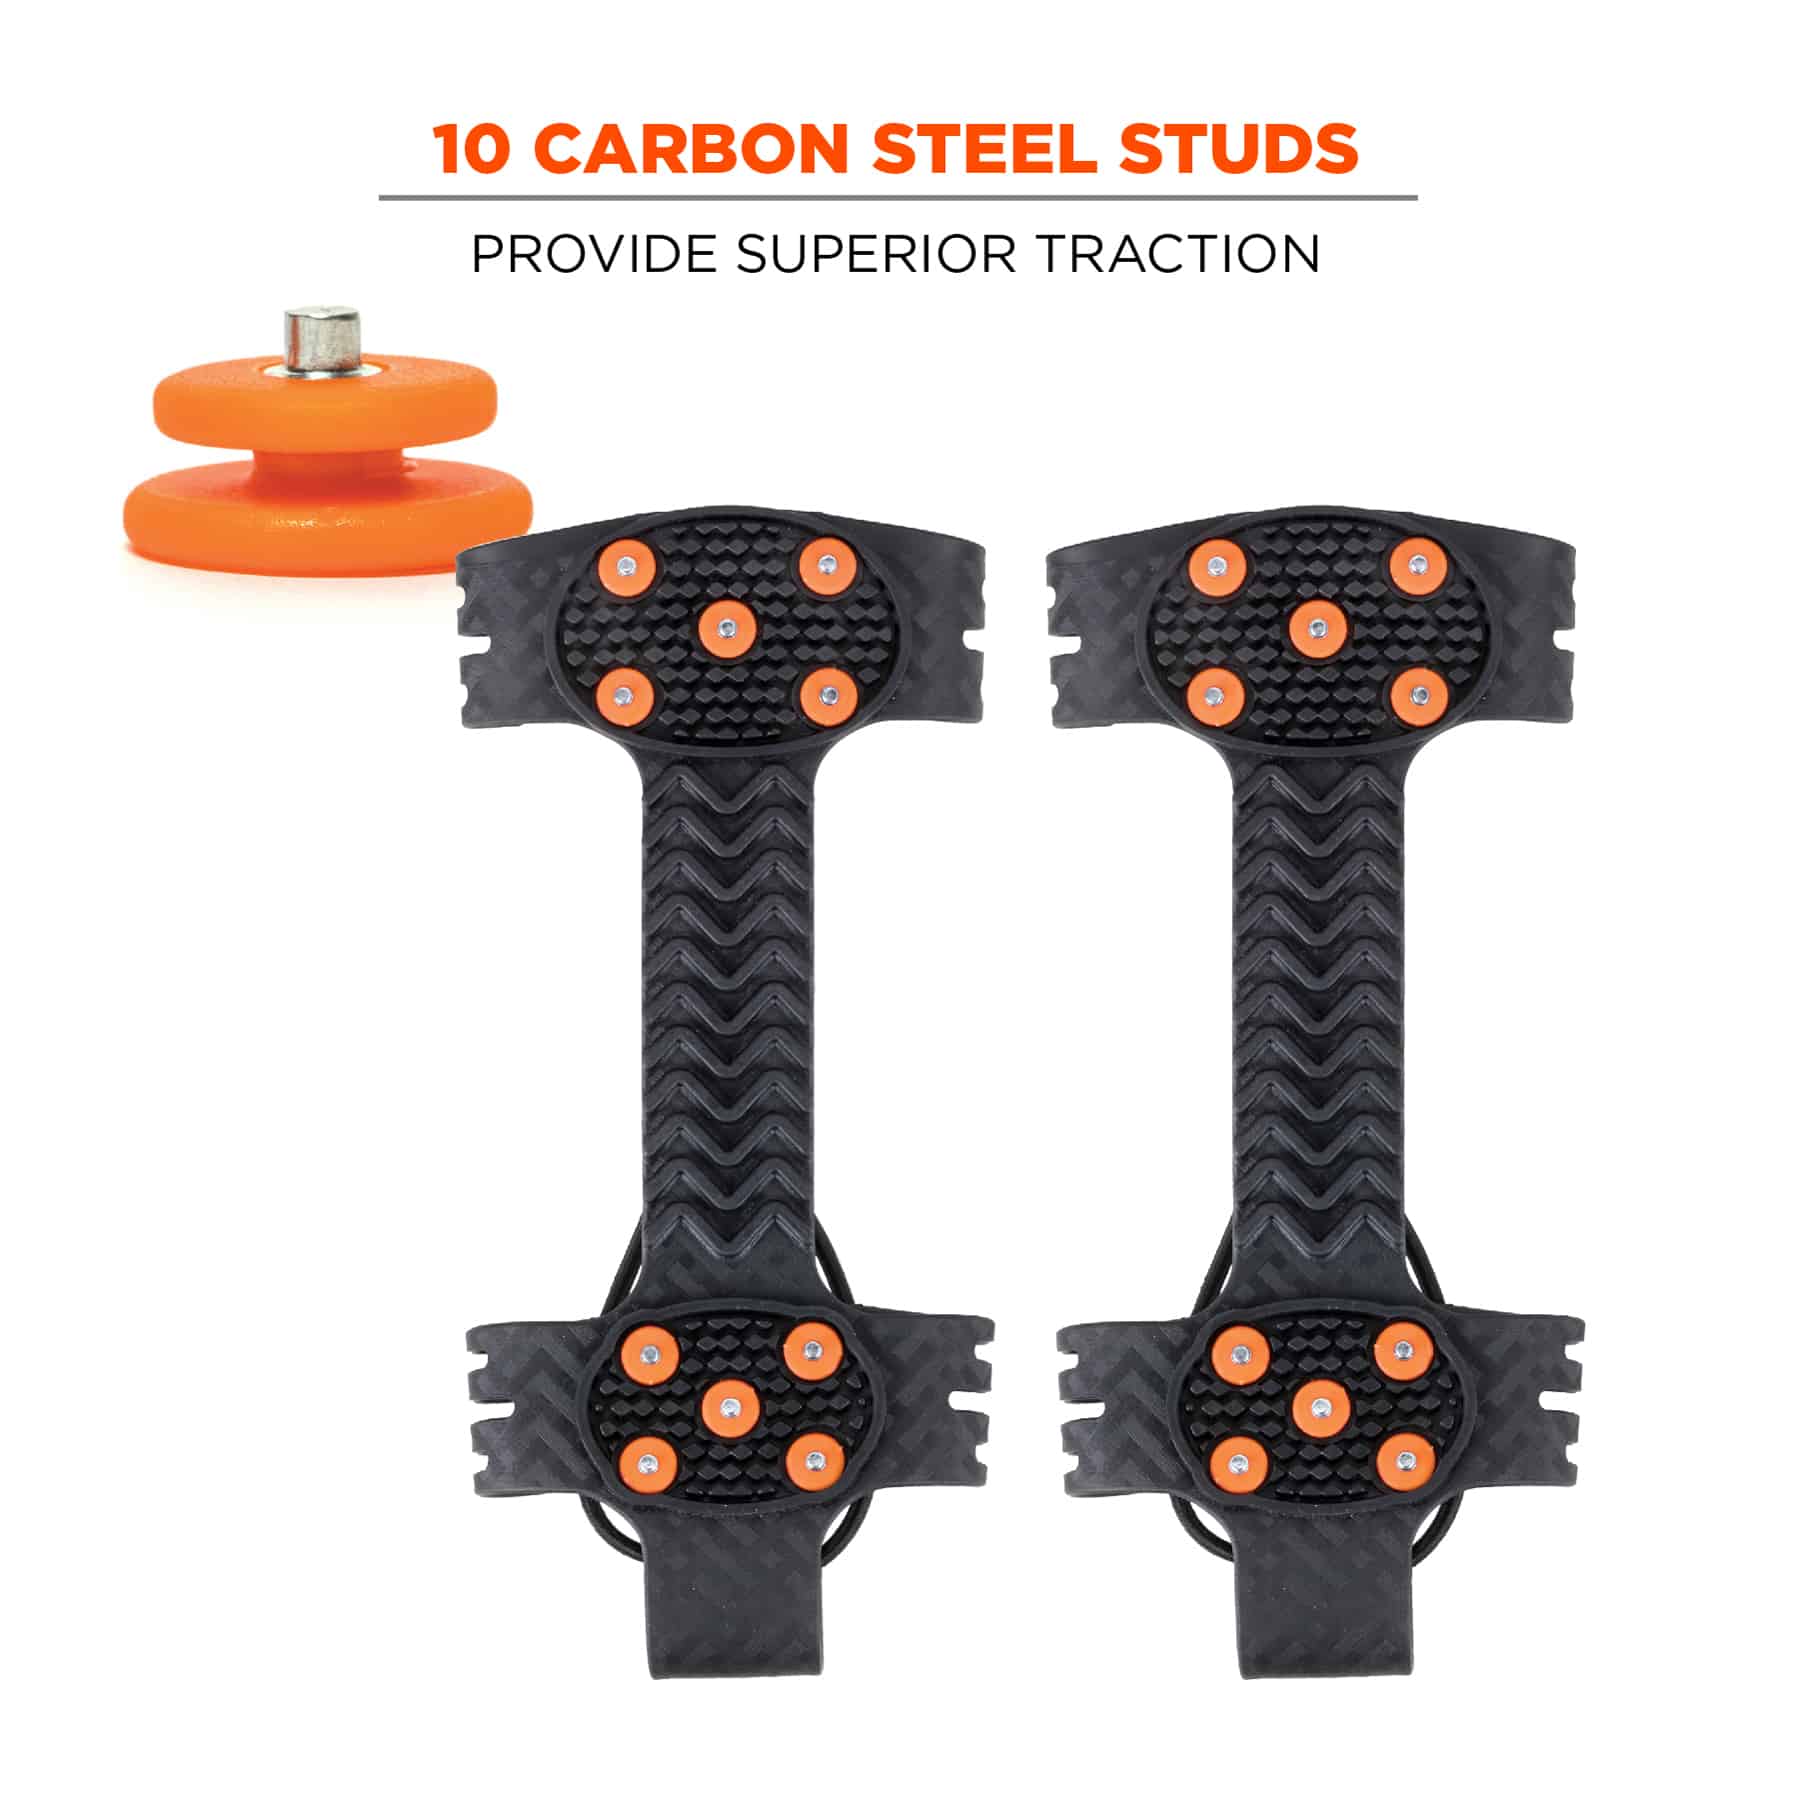 Carbon fibre studs provide grip and balance when walking in ice and snow